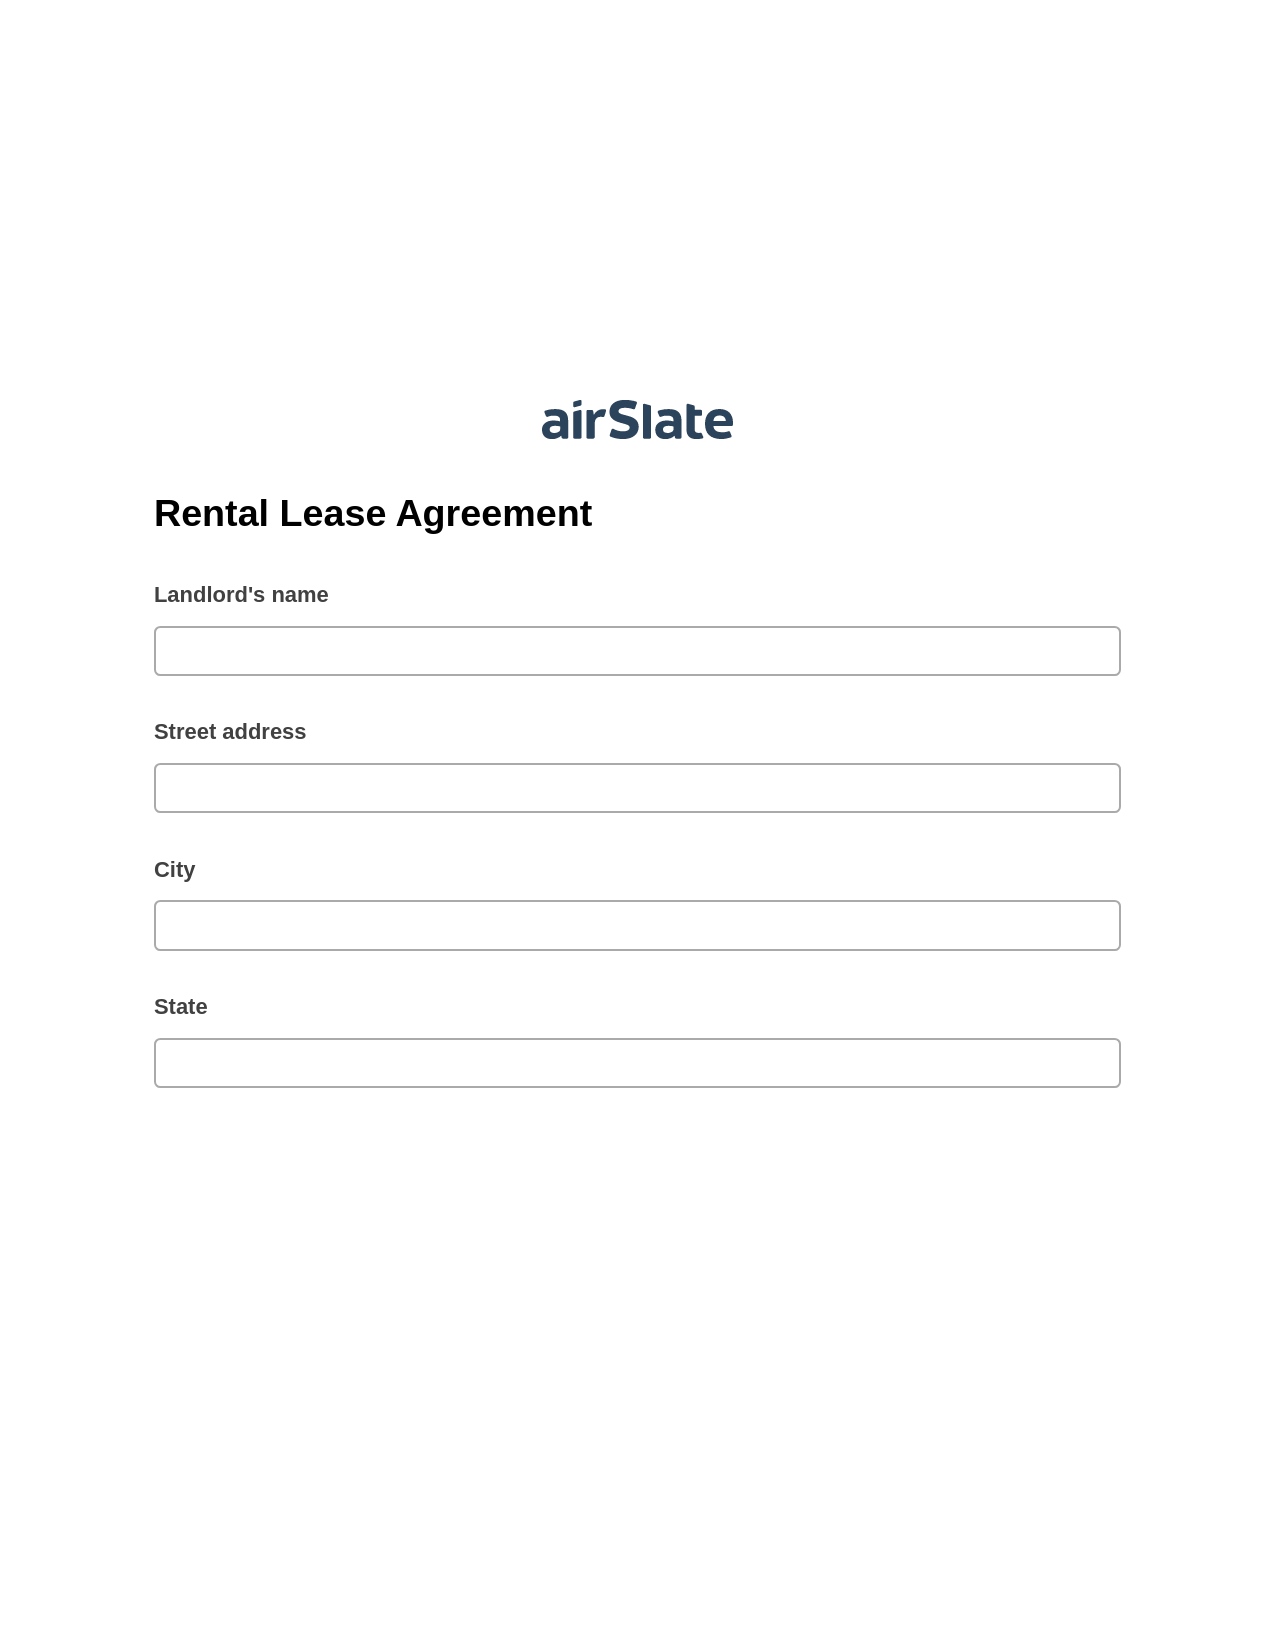 Rental Lease Agreement Pre-fill from Excel Spreadsheet Bot, Mailchimp send Campaign bot, OneDrive Bot